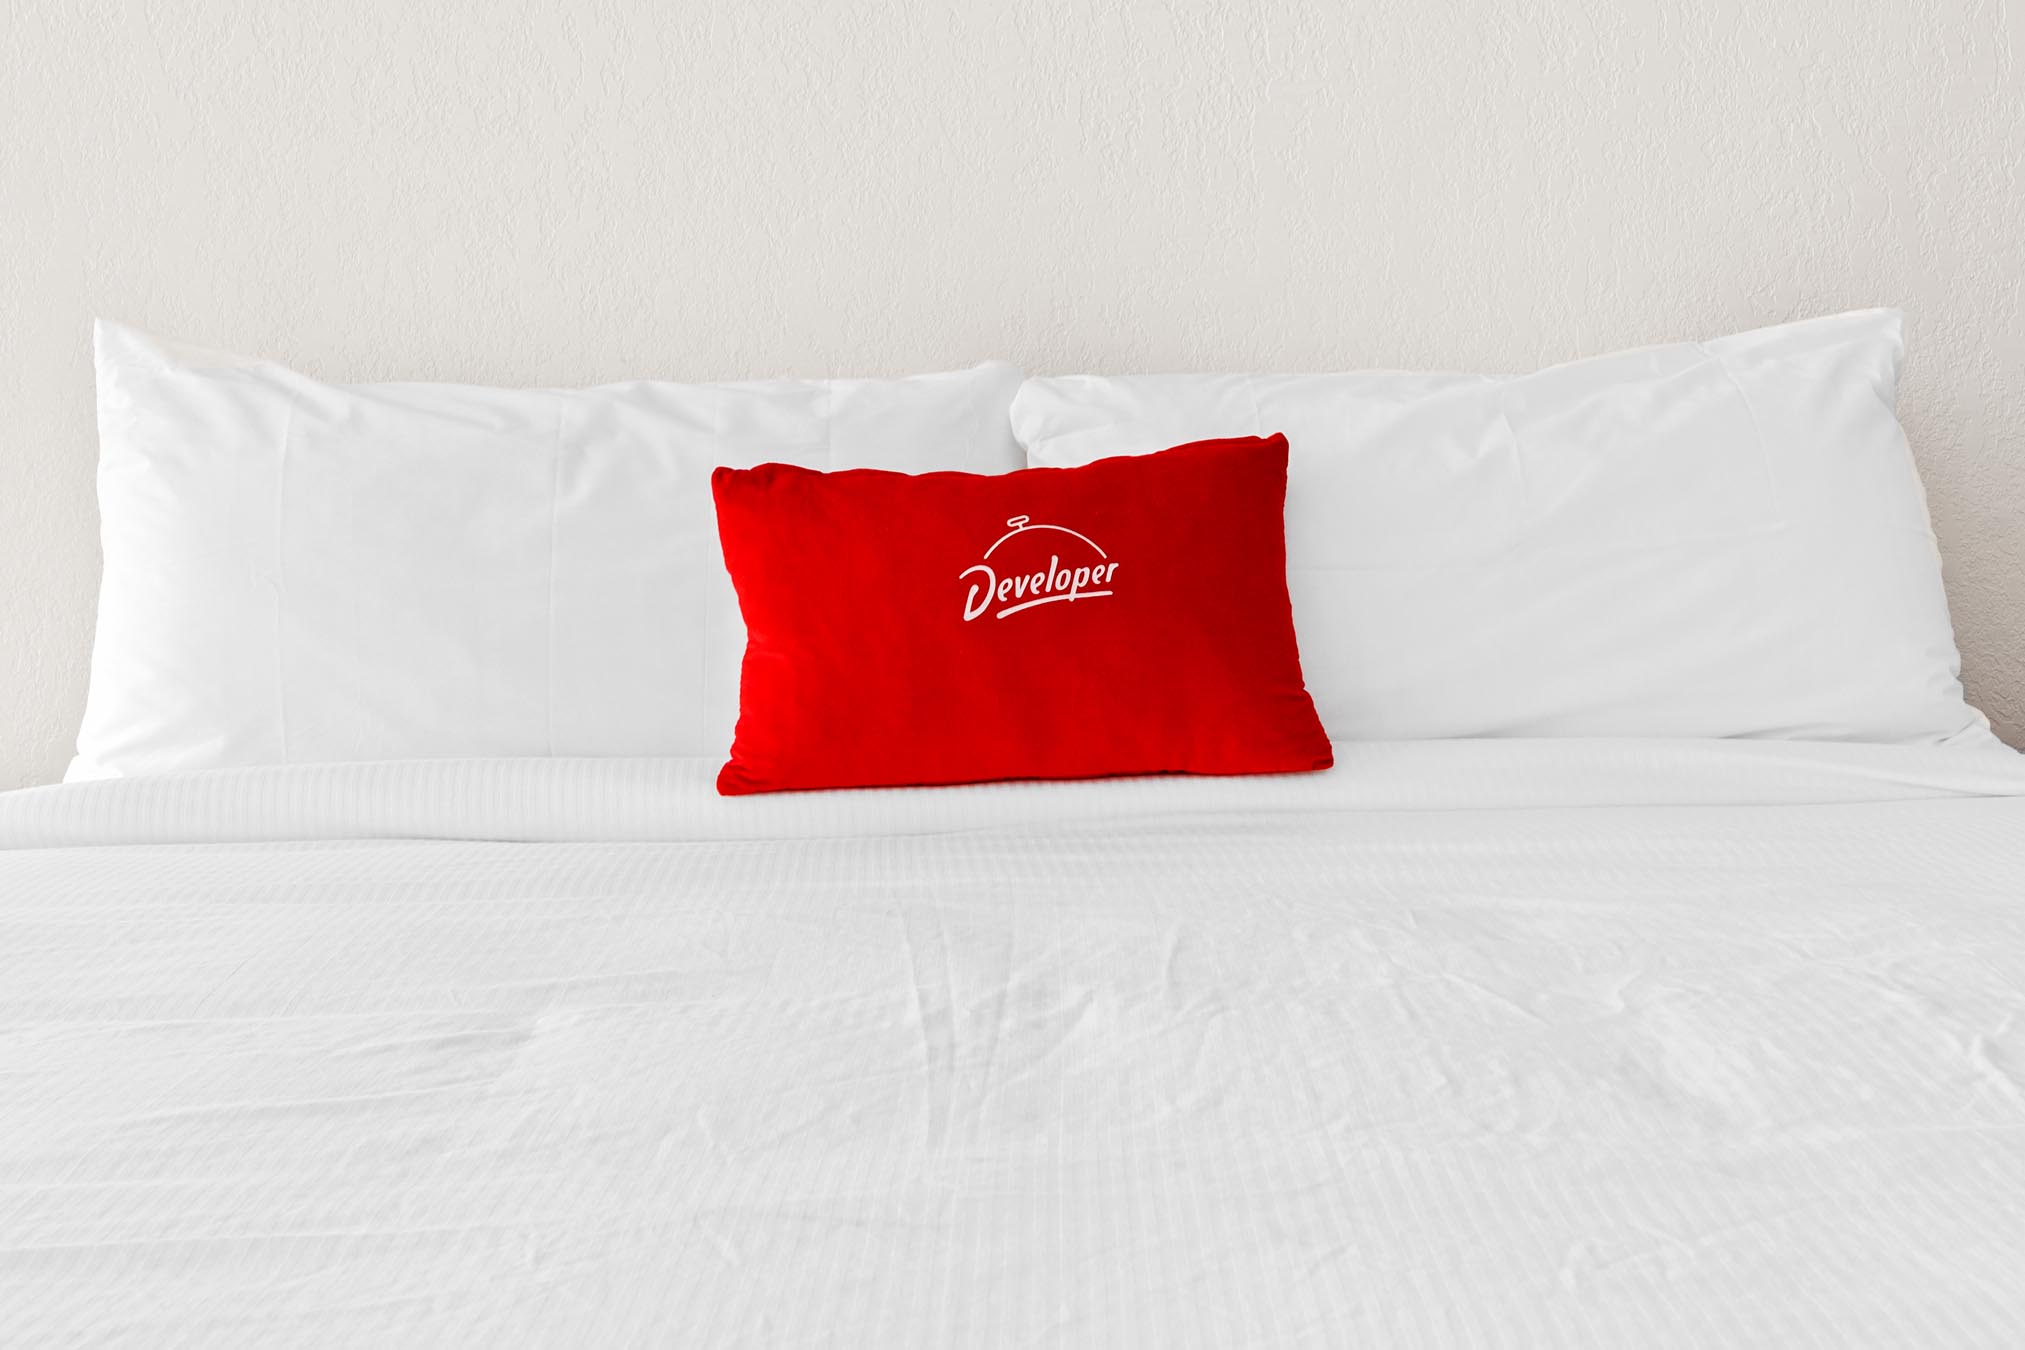 Queen bed with white sheets and red pillow